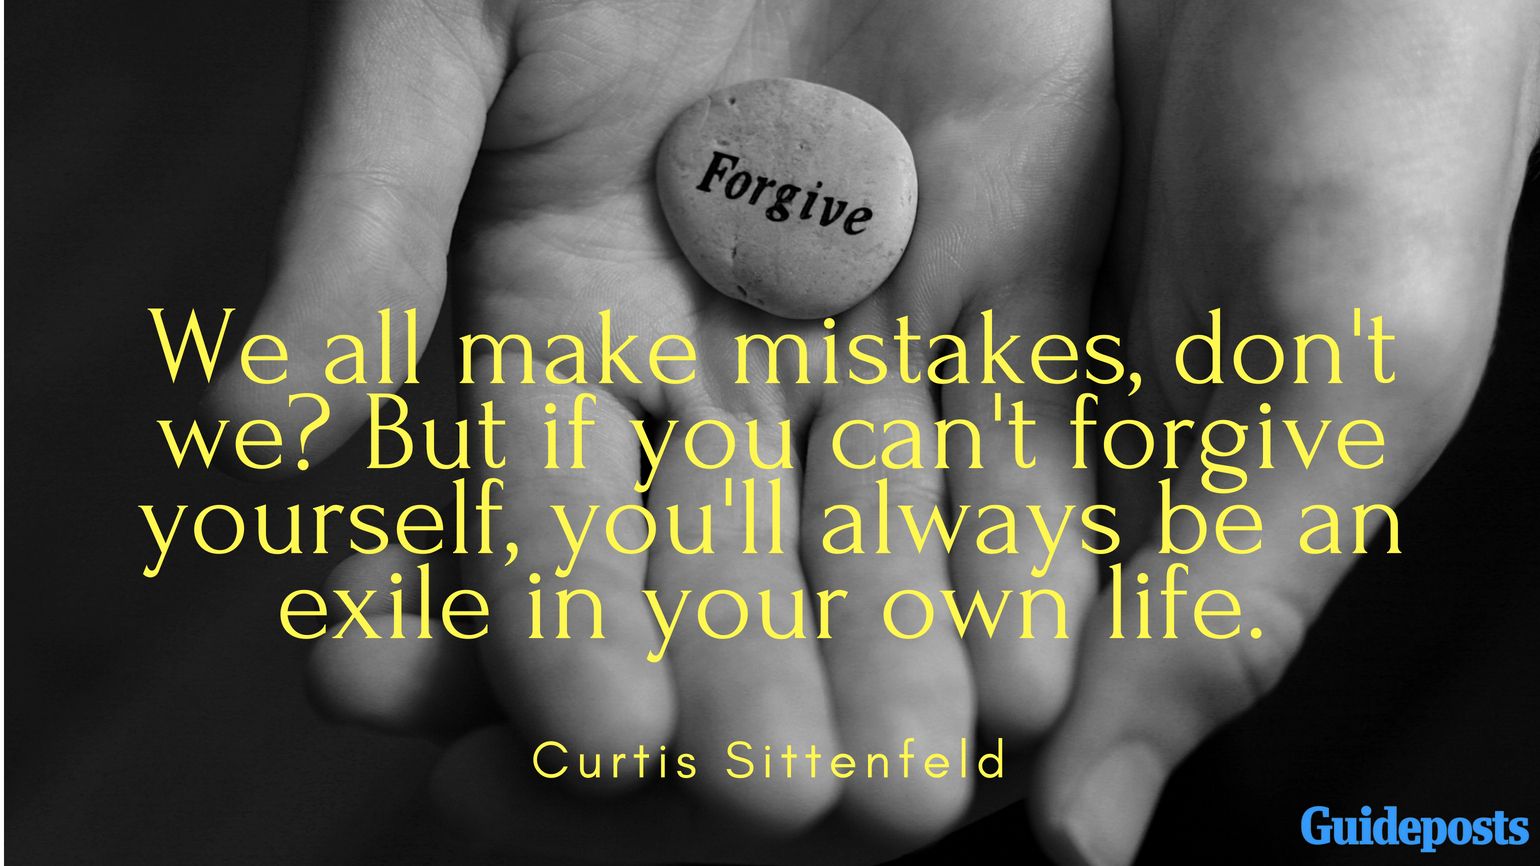 We all make mistakes, don't we? But if you can't forgive yourself, you'll always be an exile in your own life. ― Curtis Sittenfeld